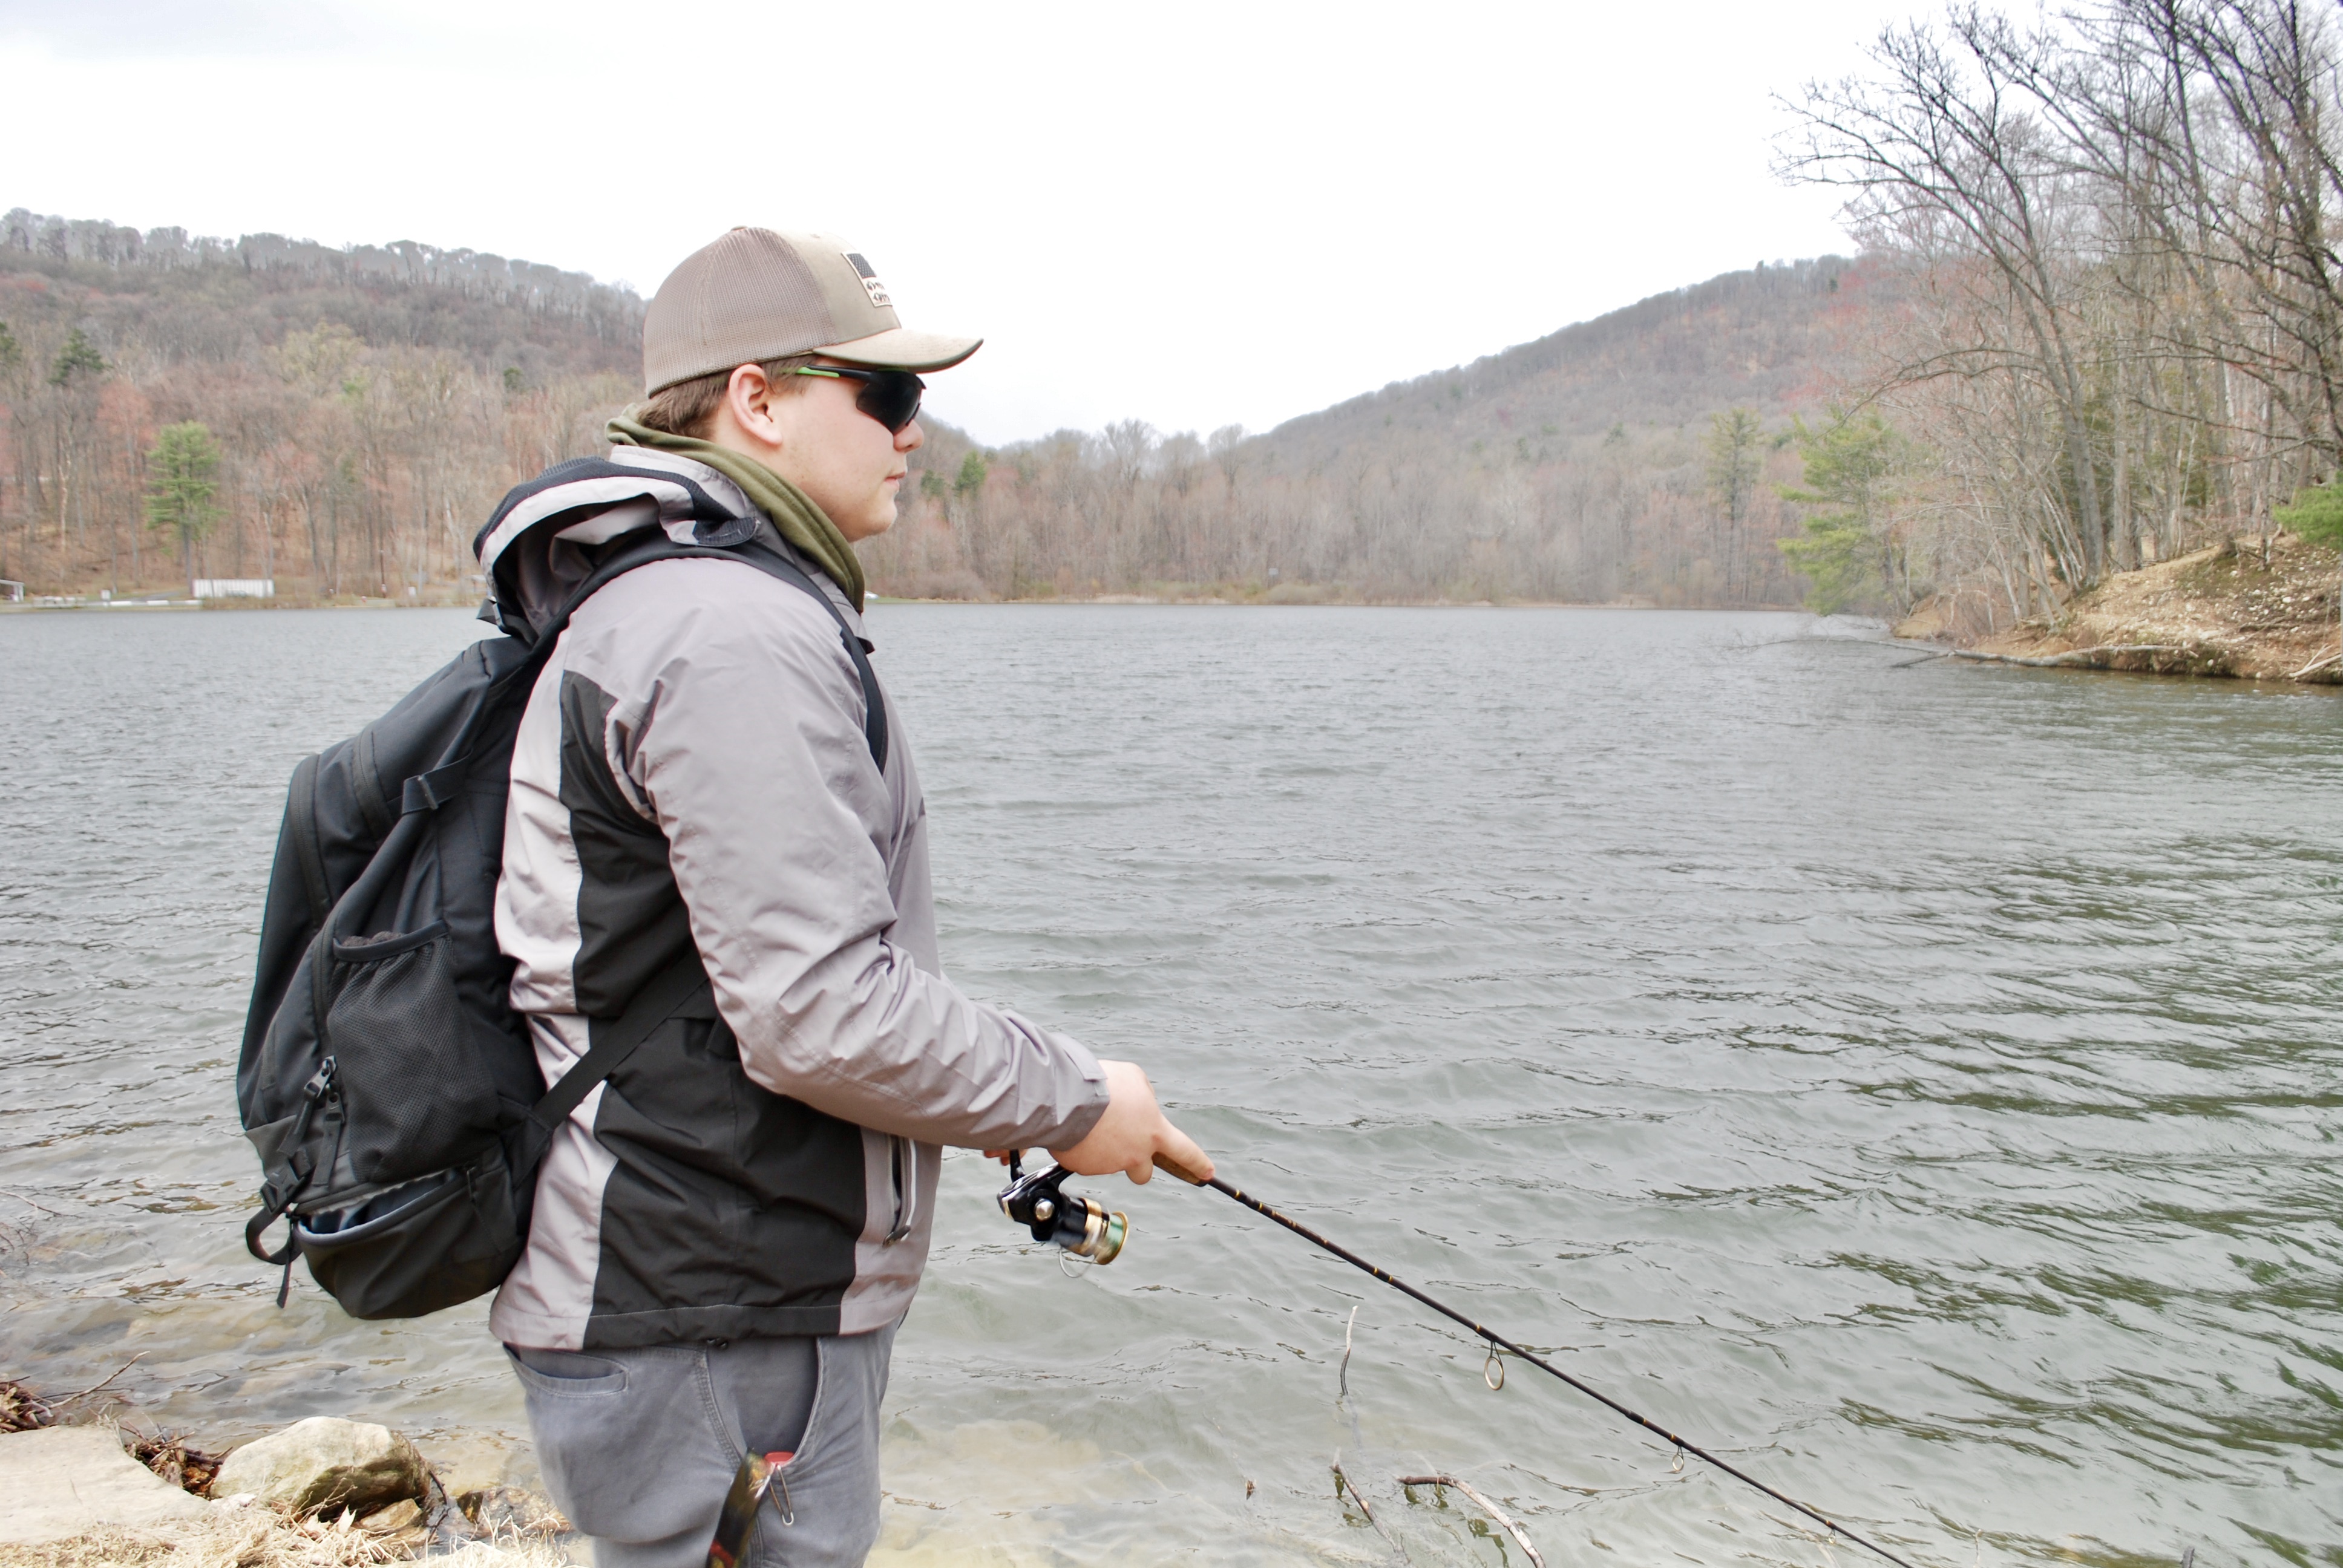 STATEWIDE OPENING DAY OF TROUT SEASON IS THIS SATURDAY, APRIL 3!